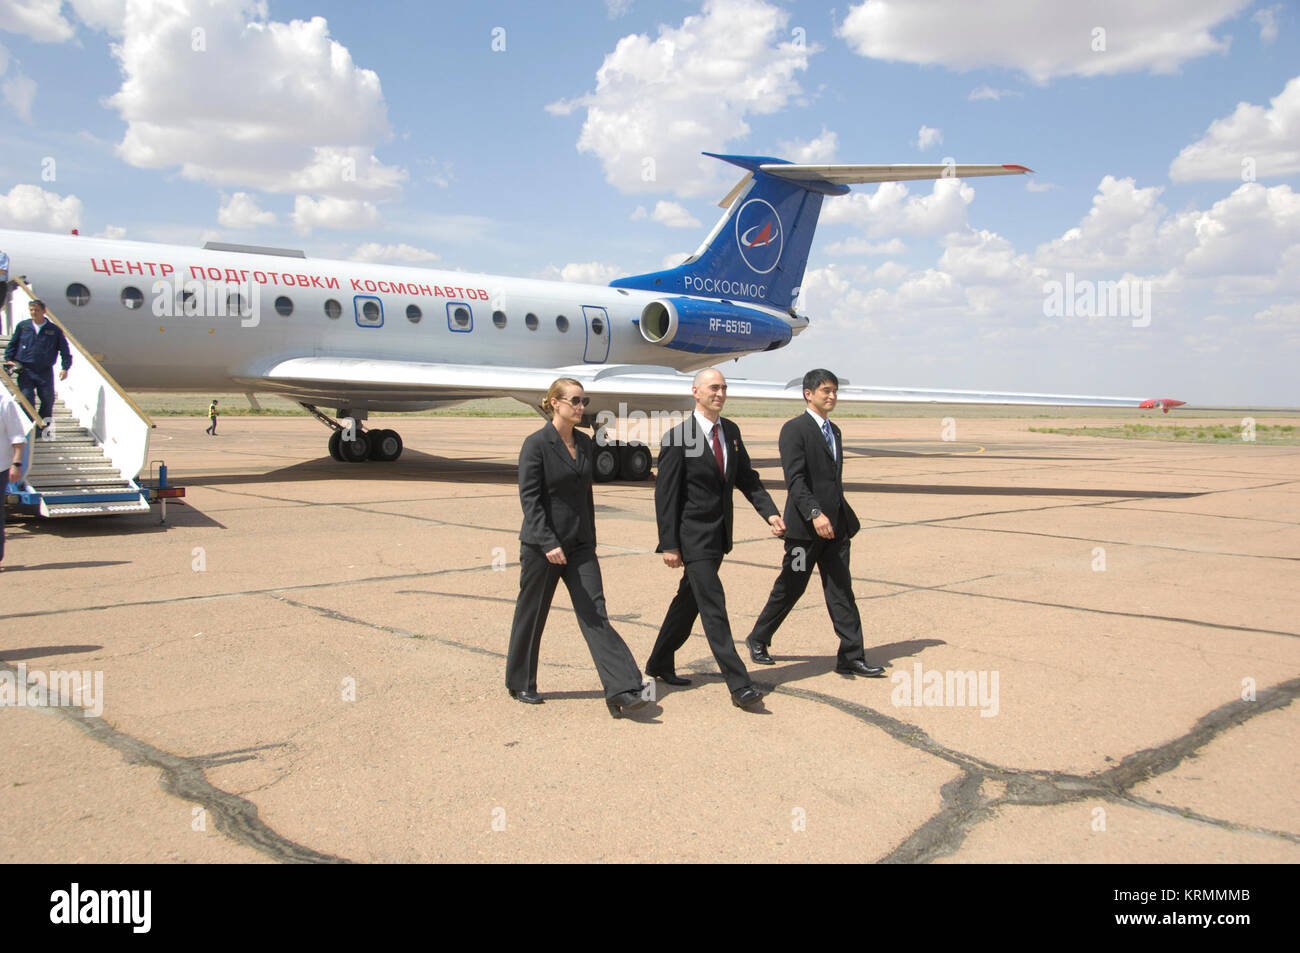 ISS Expedition 48-49 prime crewmembers Kate Rubins of NASA (left), Anatoly Ivanishin of Roscosmos (center) and Takuya Onishi of the Japan Aerospace Exploration Agency (right) arrive in Baikonur, Kazakhstan June 24 for final pre-launch training after flying from Star City, Russia. The trio will launch July 7 from the Baikonur Cosmodrome in Kazakhstan on the Soyuz MS-01 spacecraft for a planned four-month mission on the International Space Station.  NASA/Alexander Vysotsky Soyuz MS-01 crew at the airport in Baikonur Stock Photo